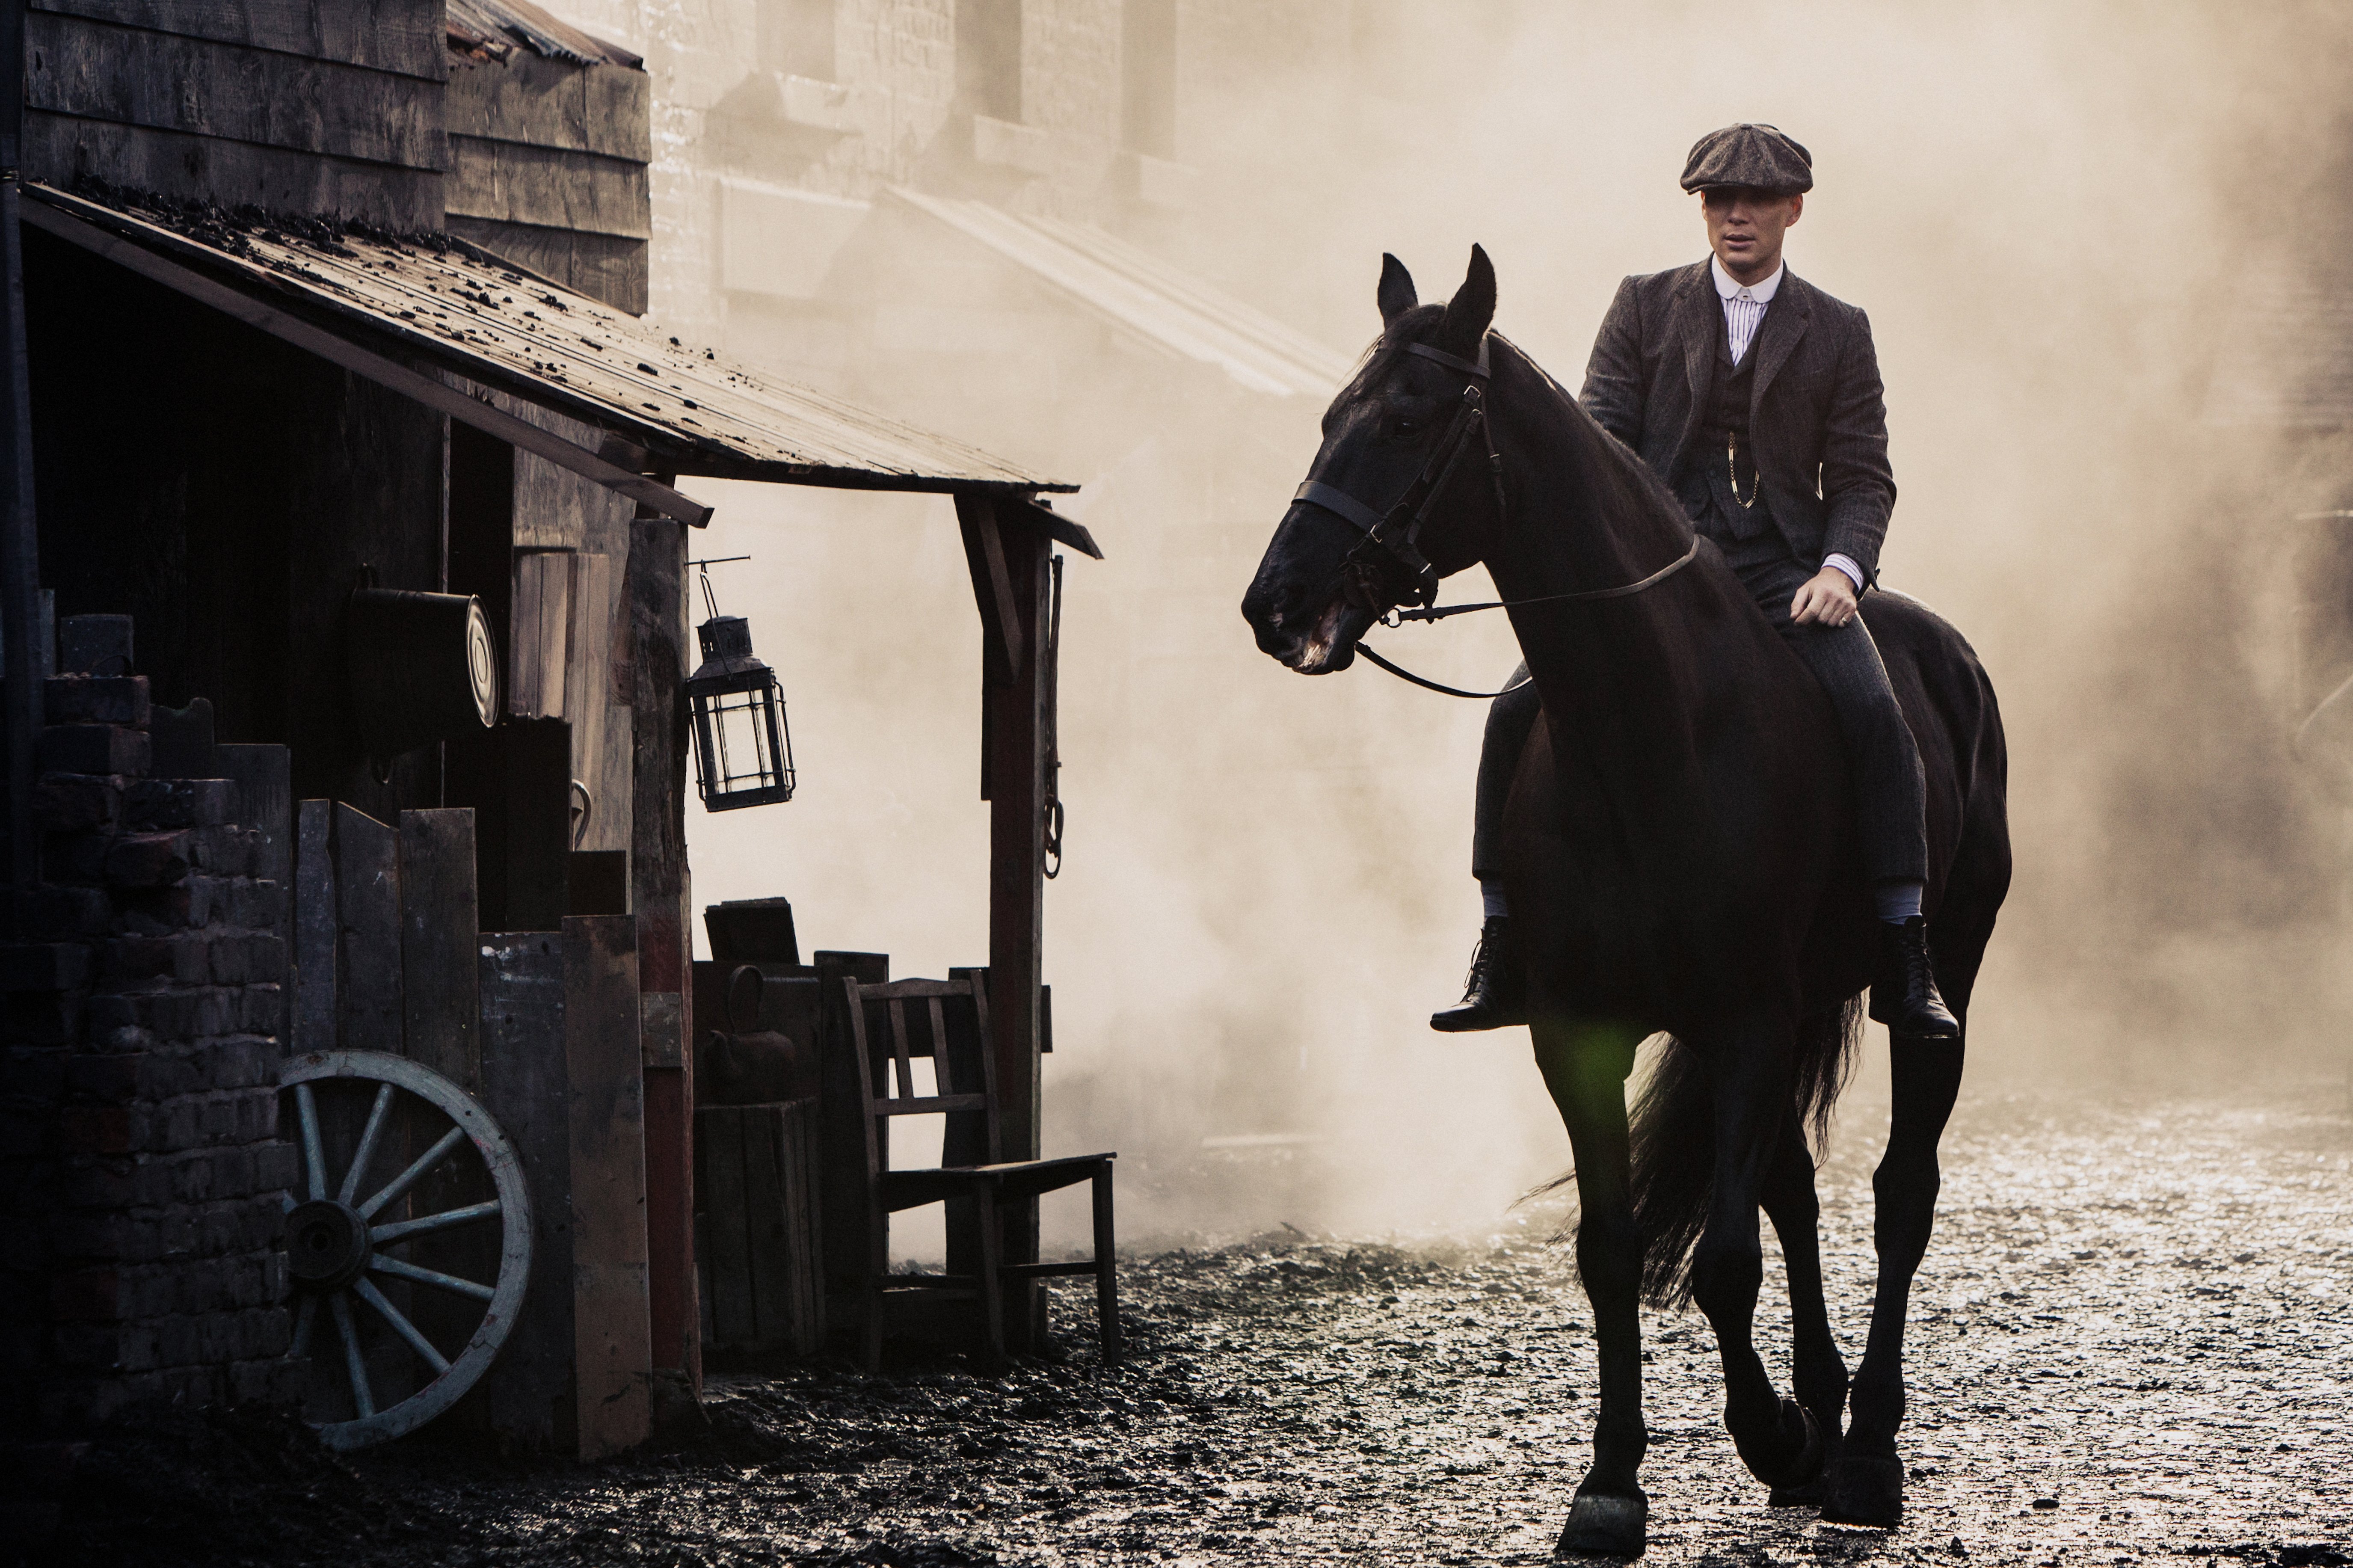 Peaky Blinders Wallpapers, Pictures, Images